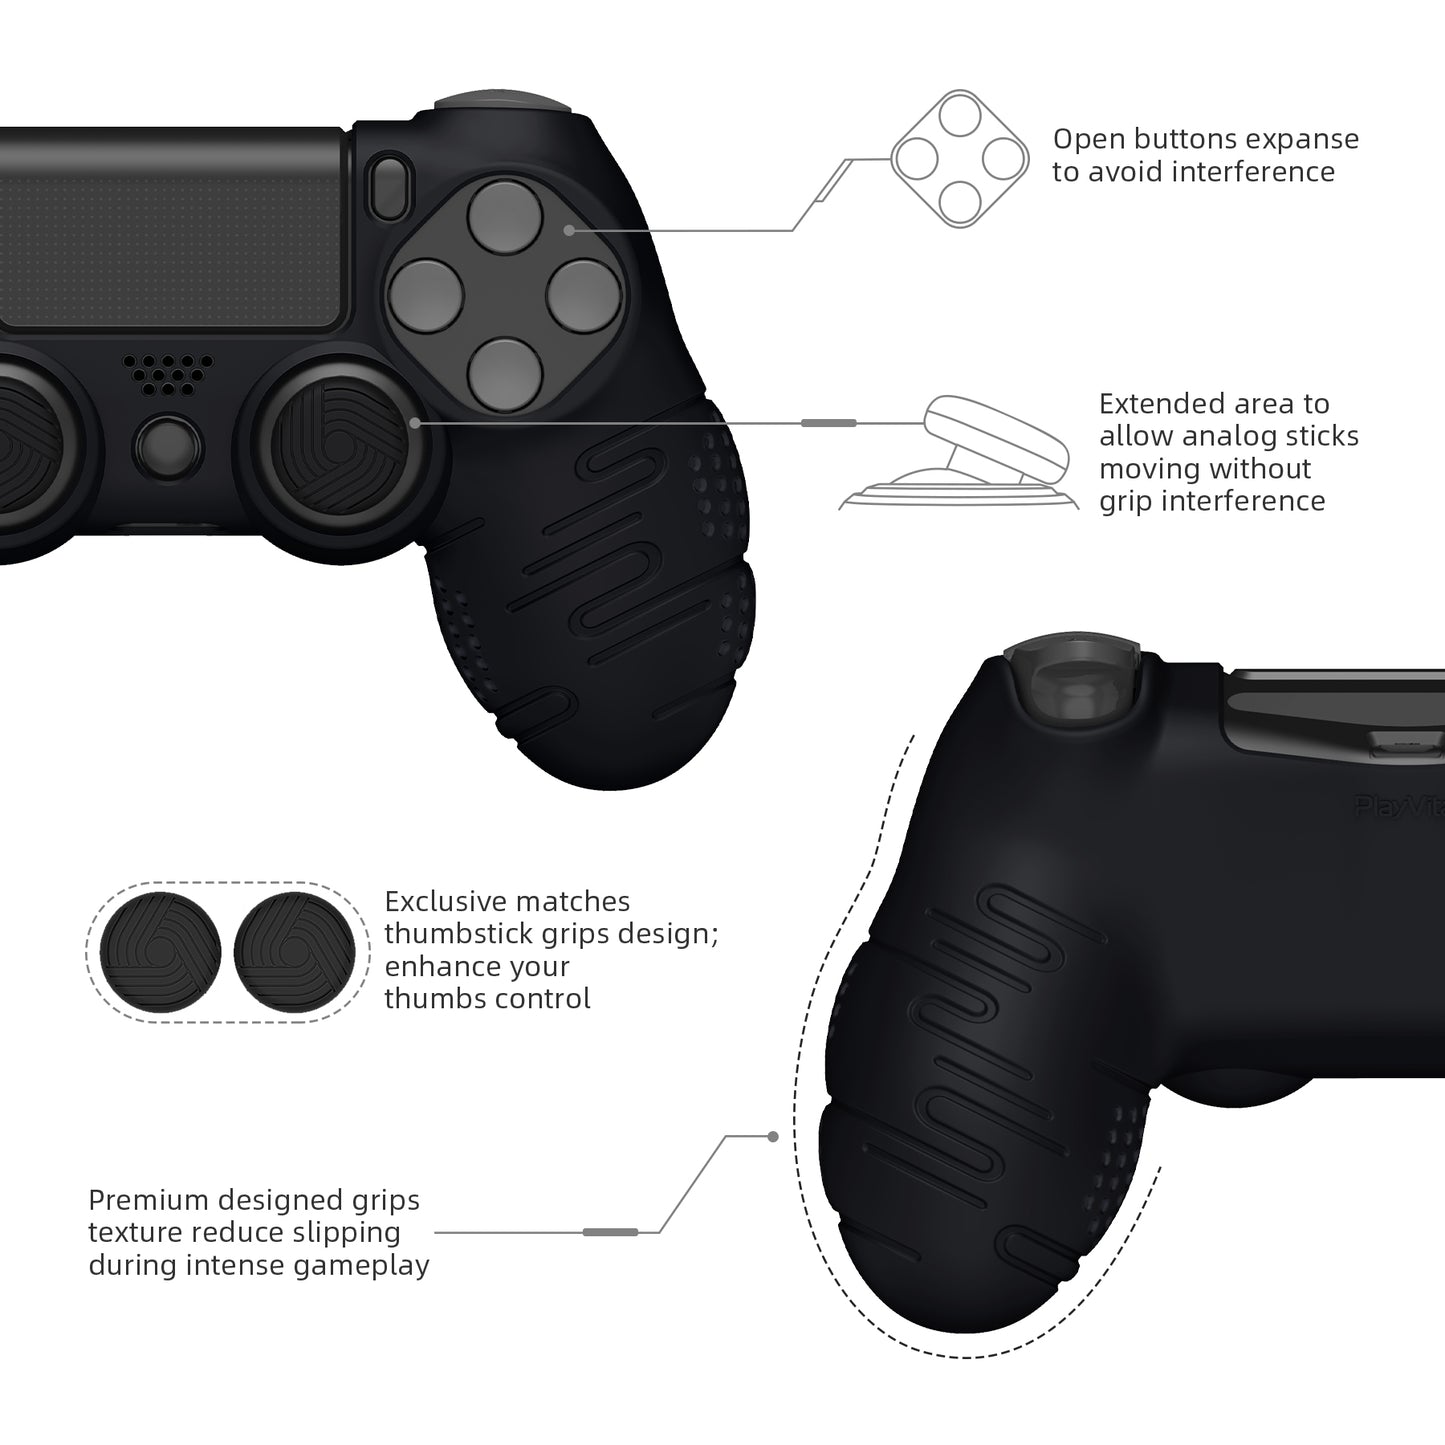 PlayVital Line & Dot Black Silicone Cover Skin for ps4 Controller, Anti-Slip Soft Protector Case Cover with Thumb Grip Caps for ps4 for ps4 Slim for ps4 Pro Controller - CLRP4P001